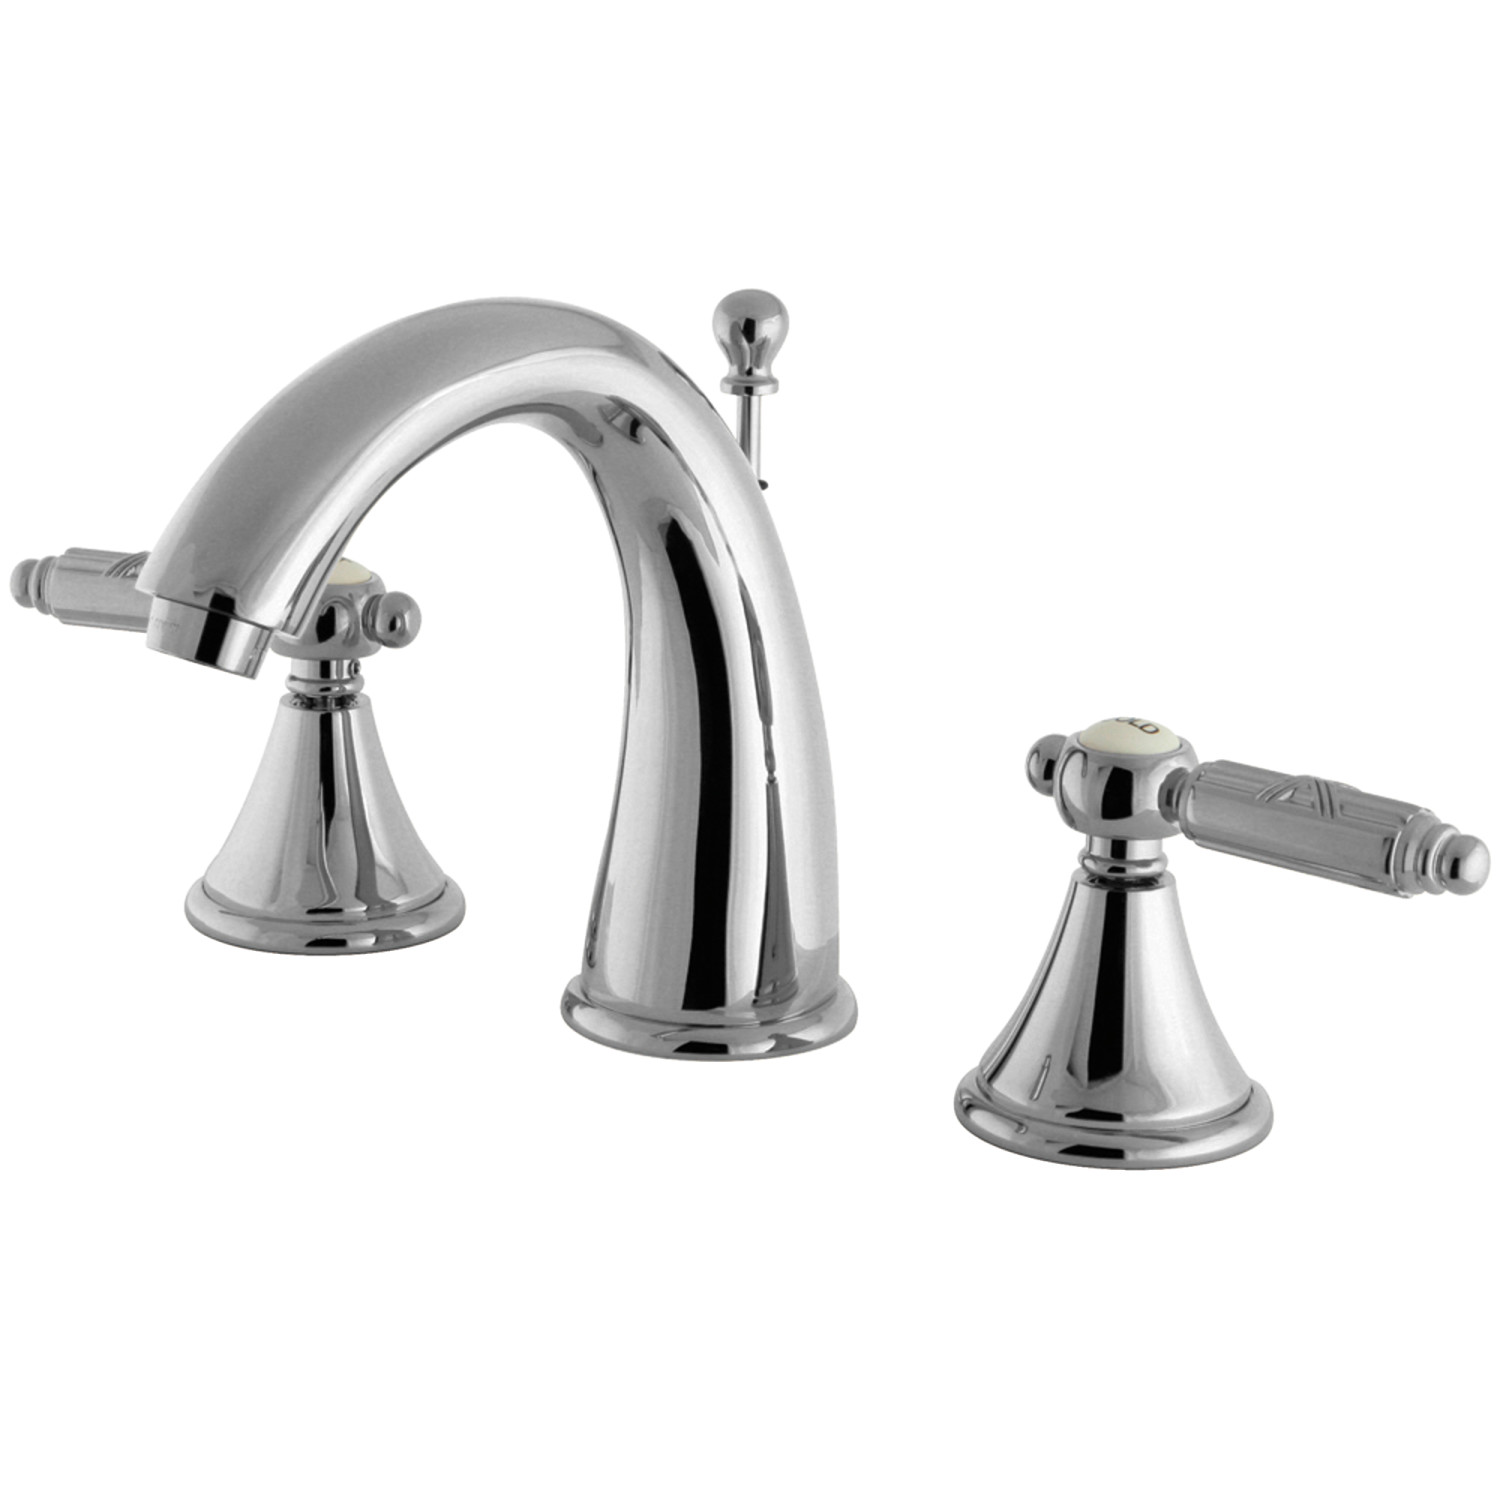 Traditional Two-Handle Three-Hole Deck Mounted Widespread Bathroom Faucet with Brass Pop-Up in Polished Chrome Color with 4 Finish Options